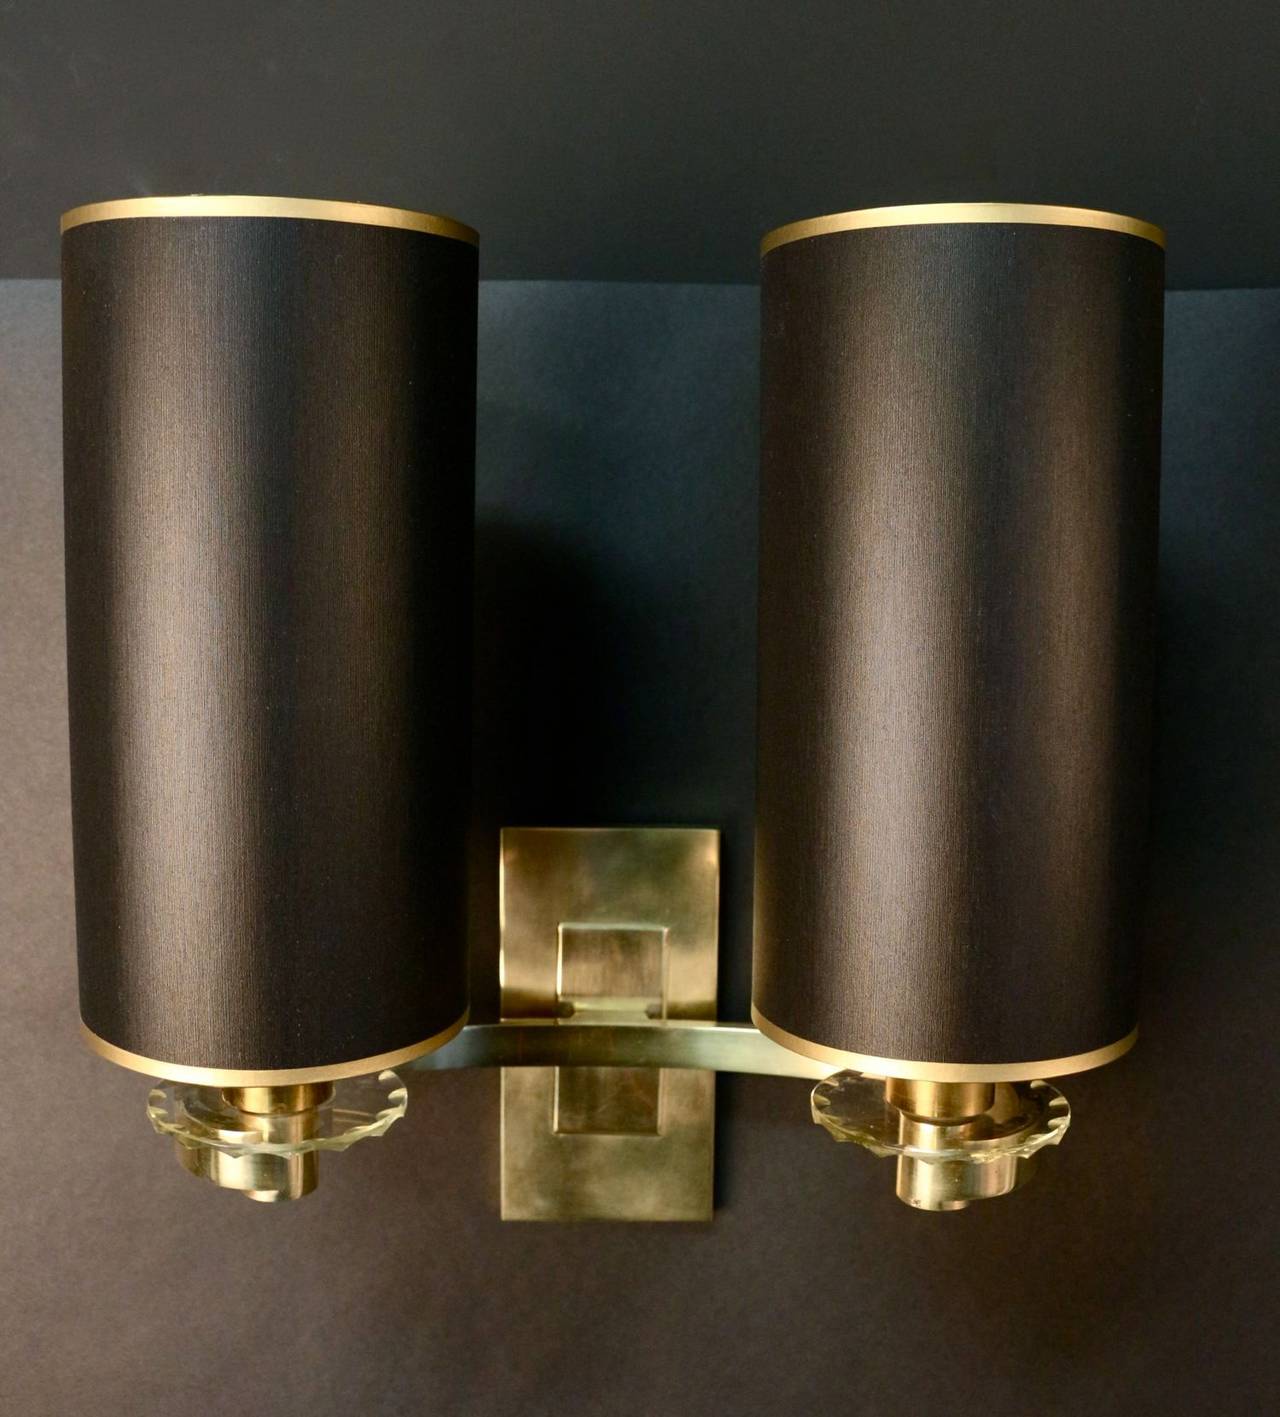 Pair of 1940s Sconces by Ateliers Petitot 1